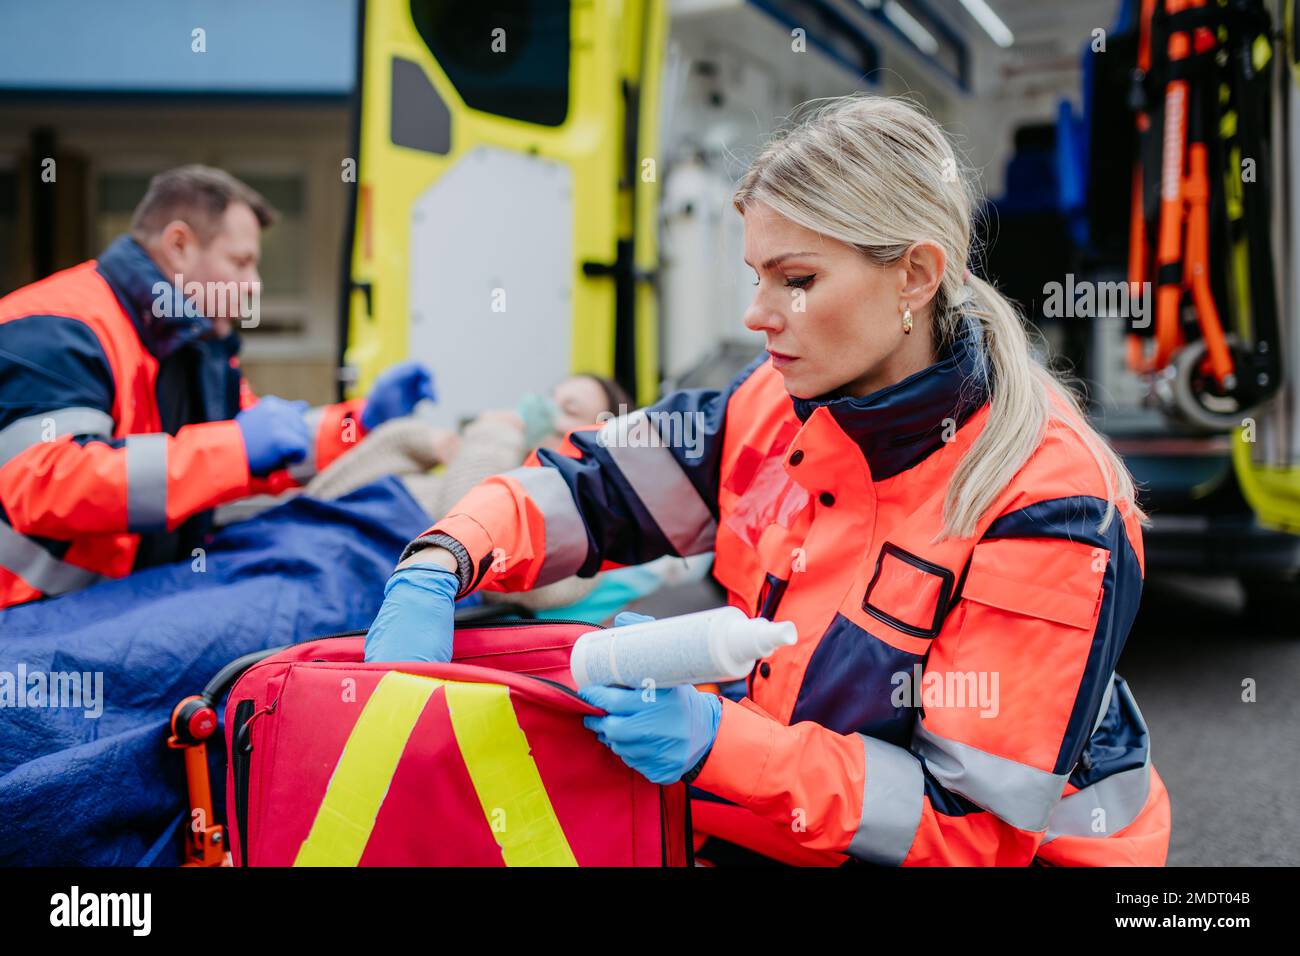 Rescuers taking care of patient, preparing her for transport. Stock Photo